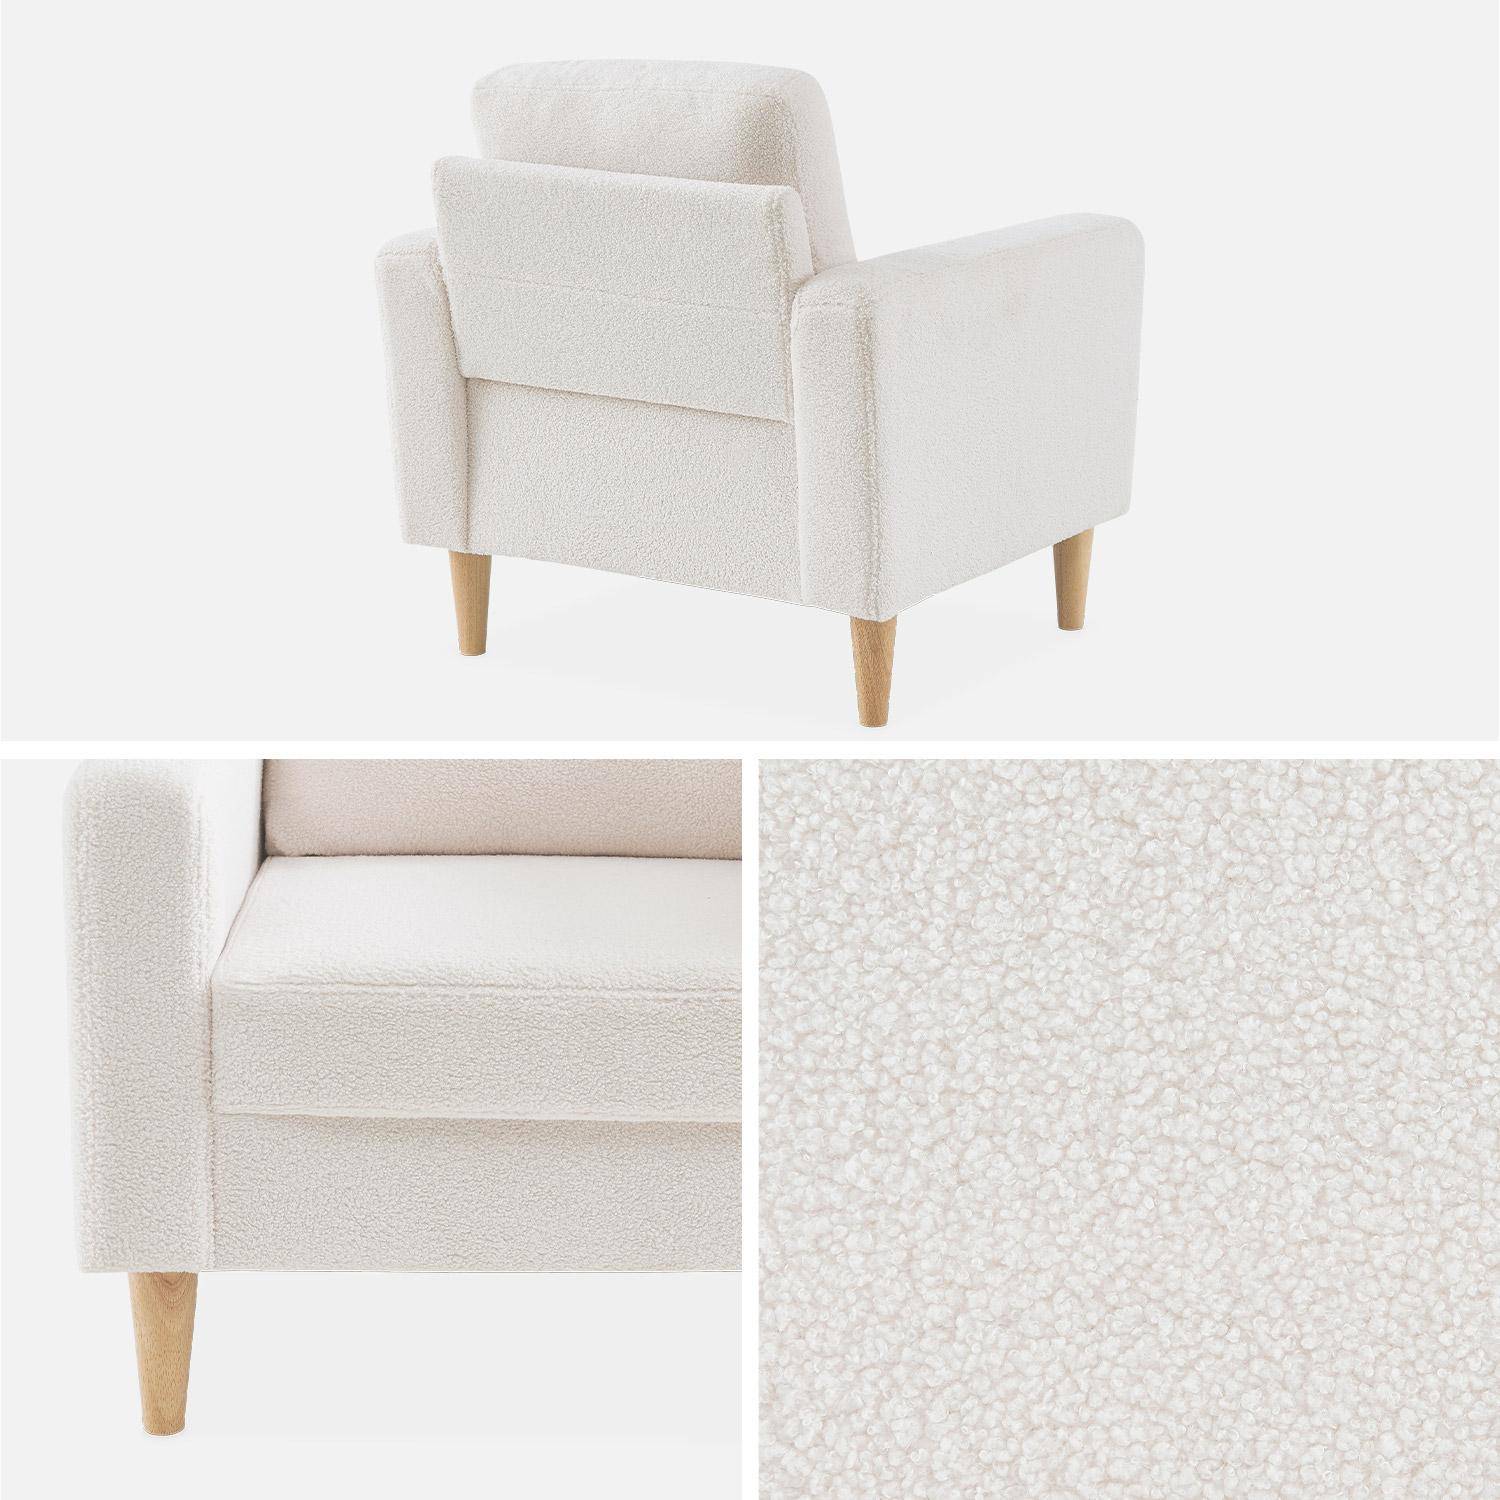 Scandi-style armchair with wooden legs - Bjorn - white boucle,sweeek,Photo5